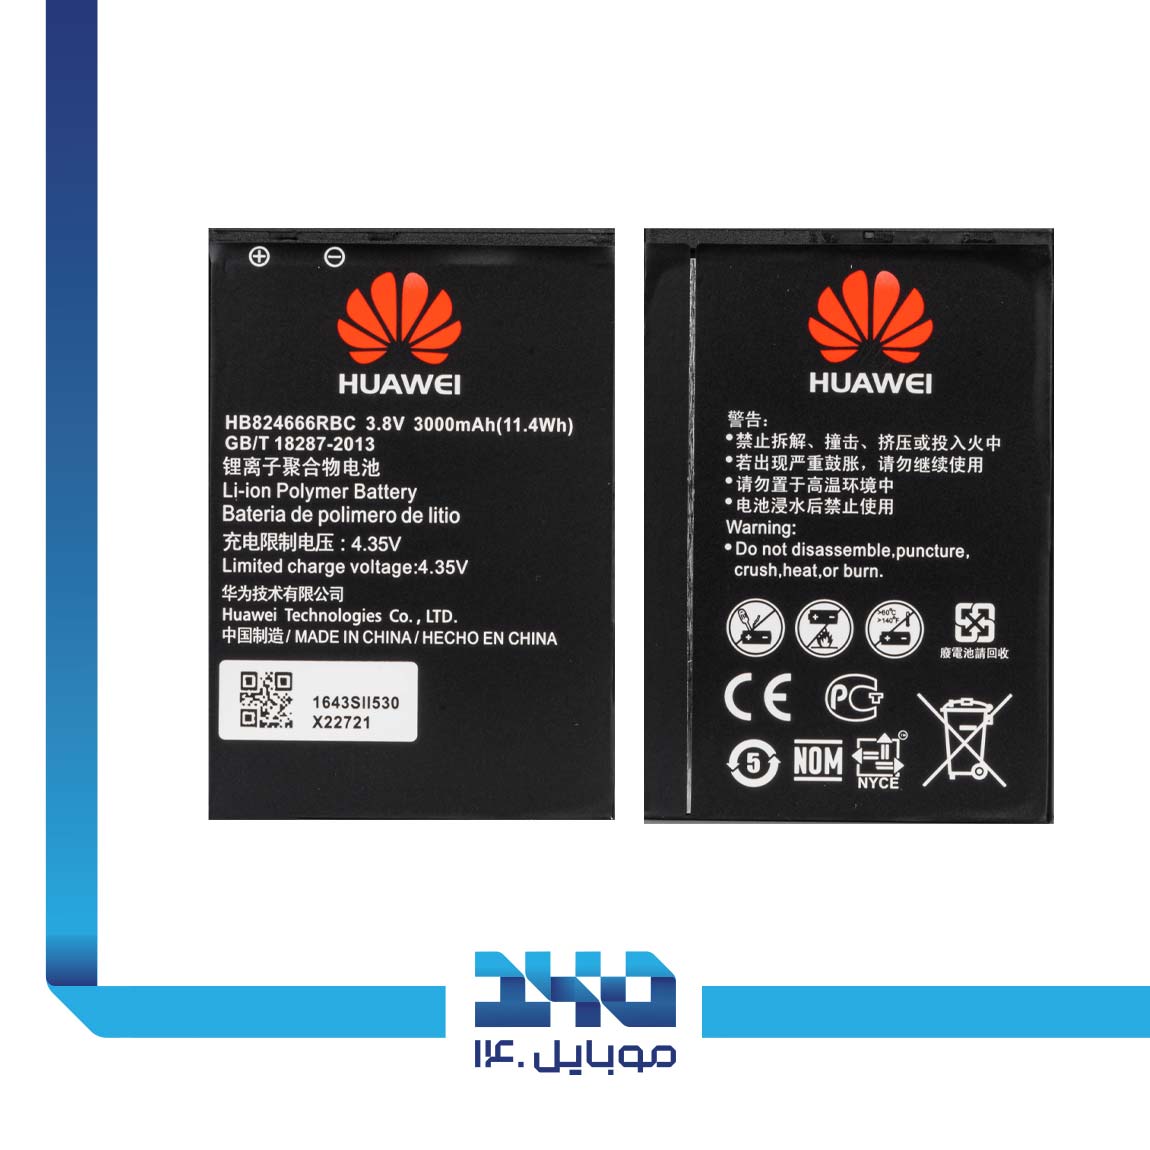 Huawei 824666RBC Modem Router Battery 3